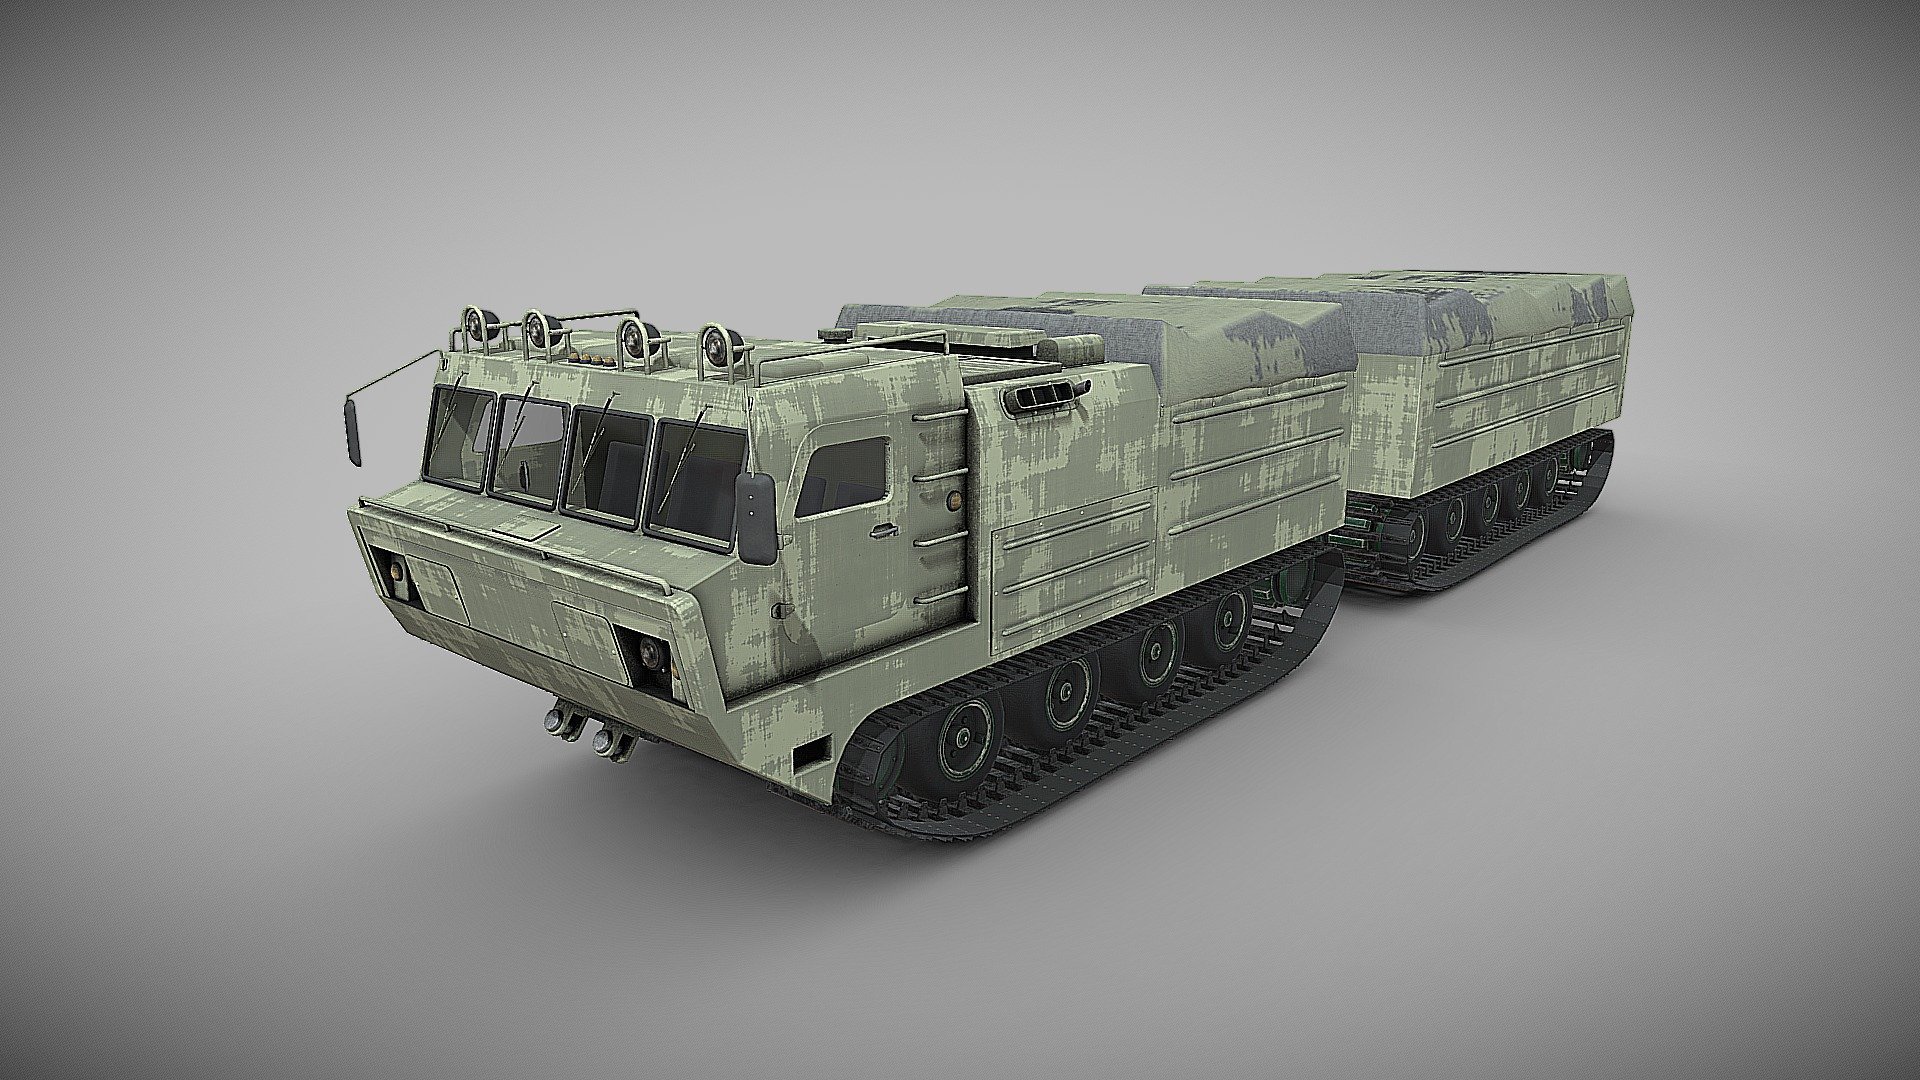 All-terrain vehicle DT-10. Game ready asset. Fully subdivided parts for ease of animation.
DT-10 &ldquo;Vityaz